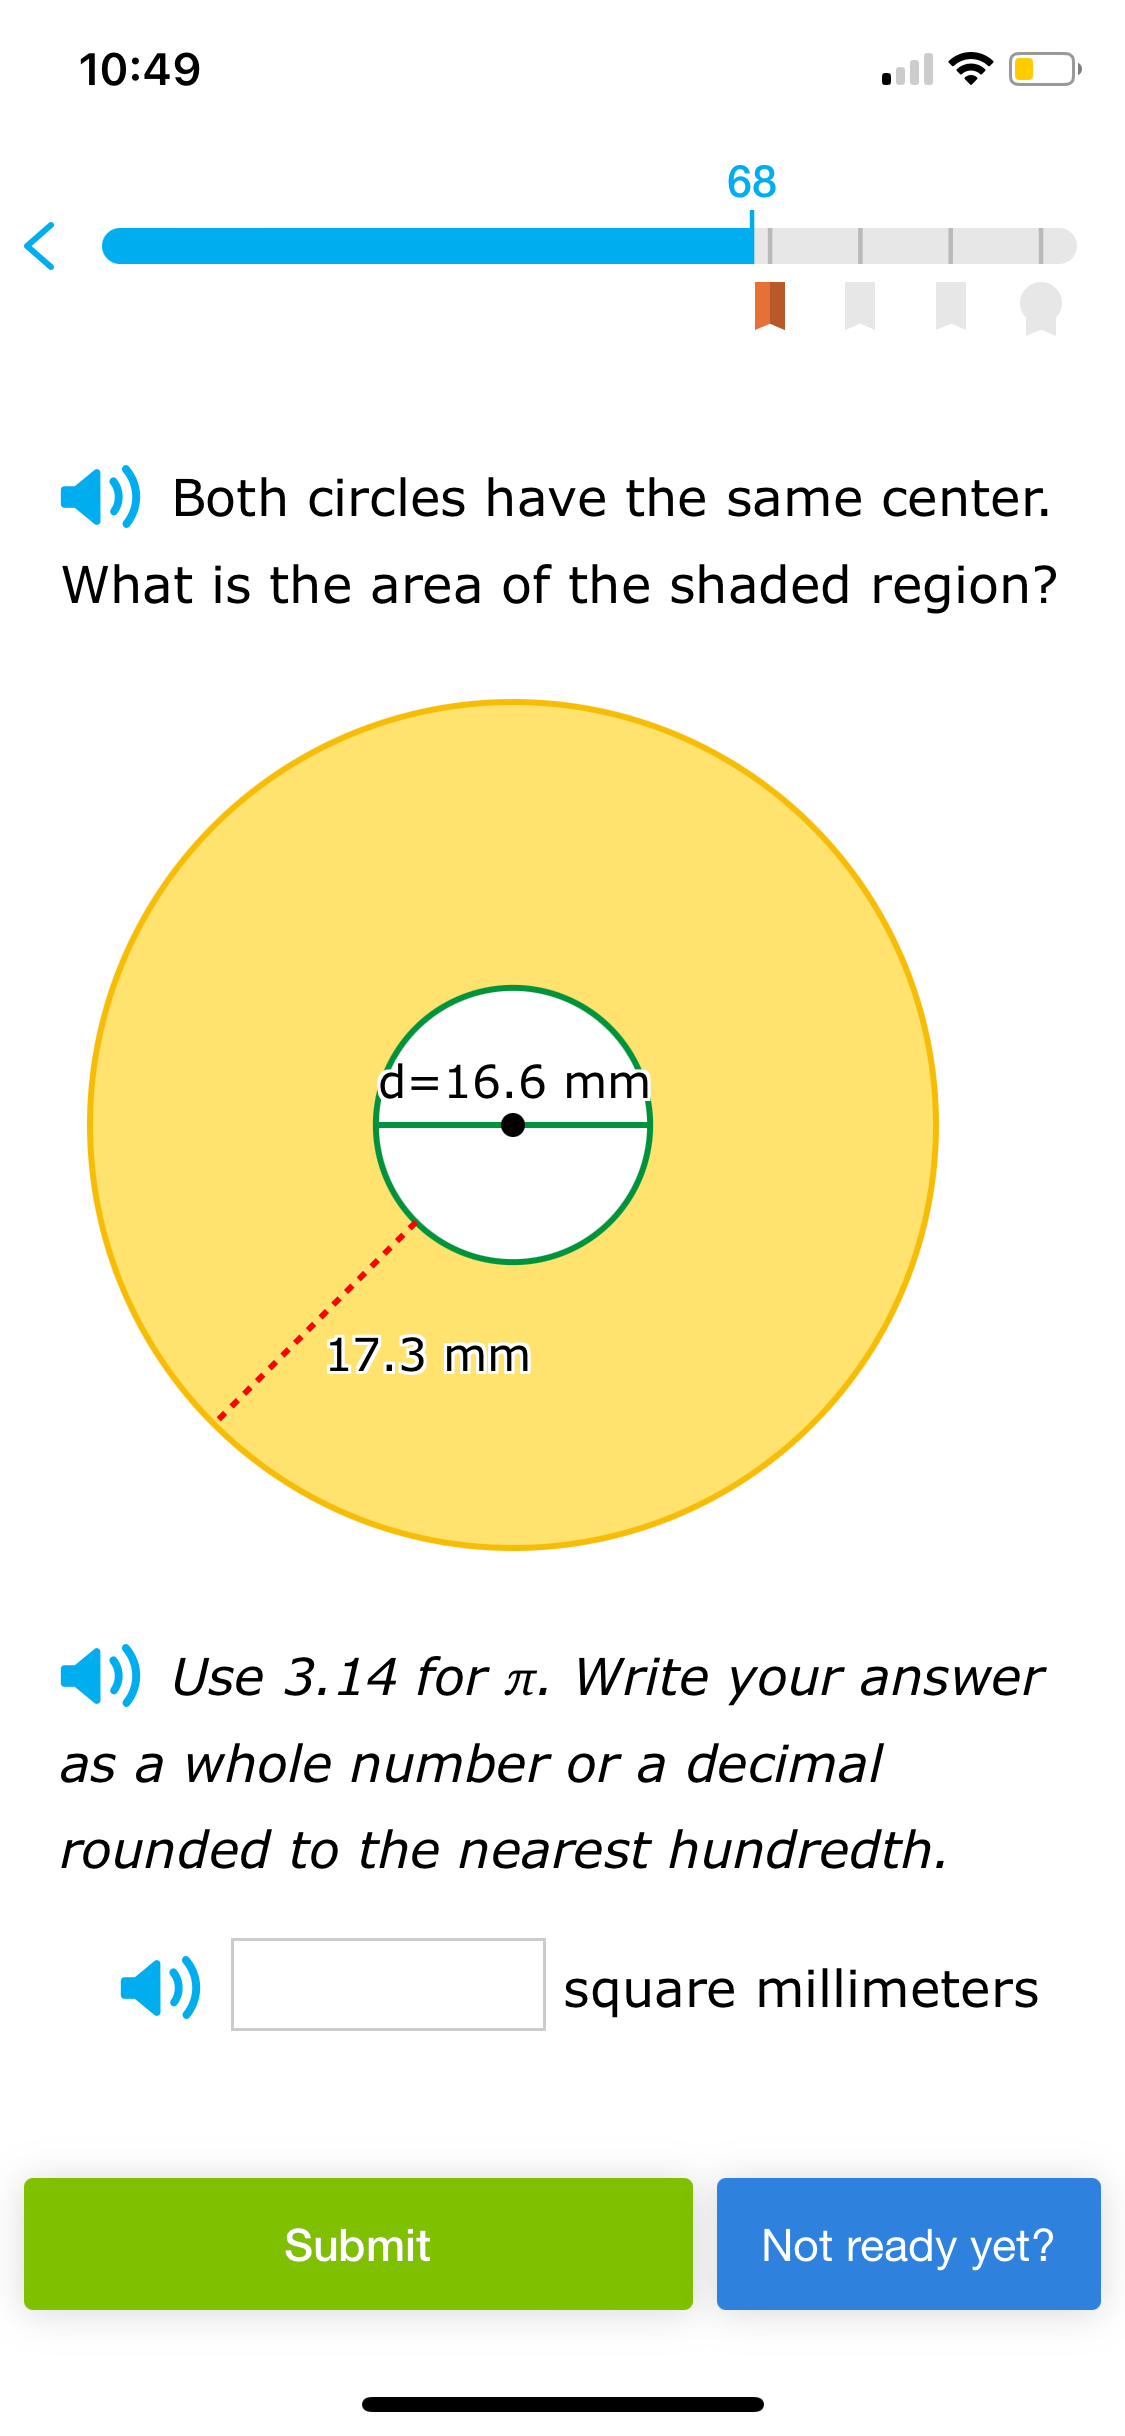 10:49
68
80
Both circles have the same center.
What is the area of the shaded region?
d=16.6 mm
17.3 mm
()) Use 3.14 for л. Write your answer
as a whole number or a decimal
rounded to the nearest hundredth.
square millimeters
Submit
Not ready yet?